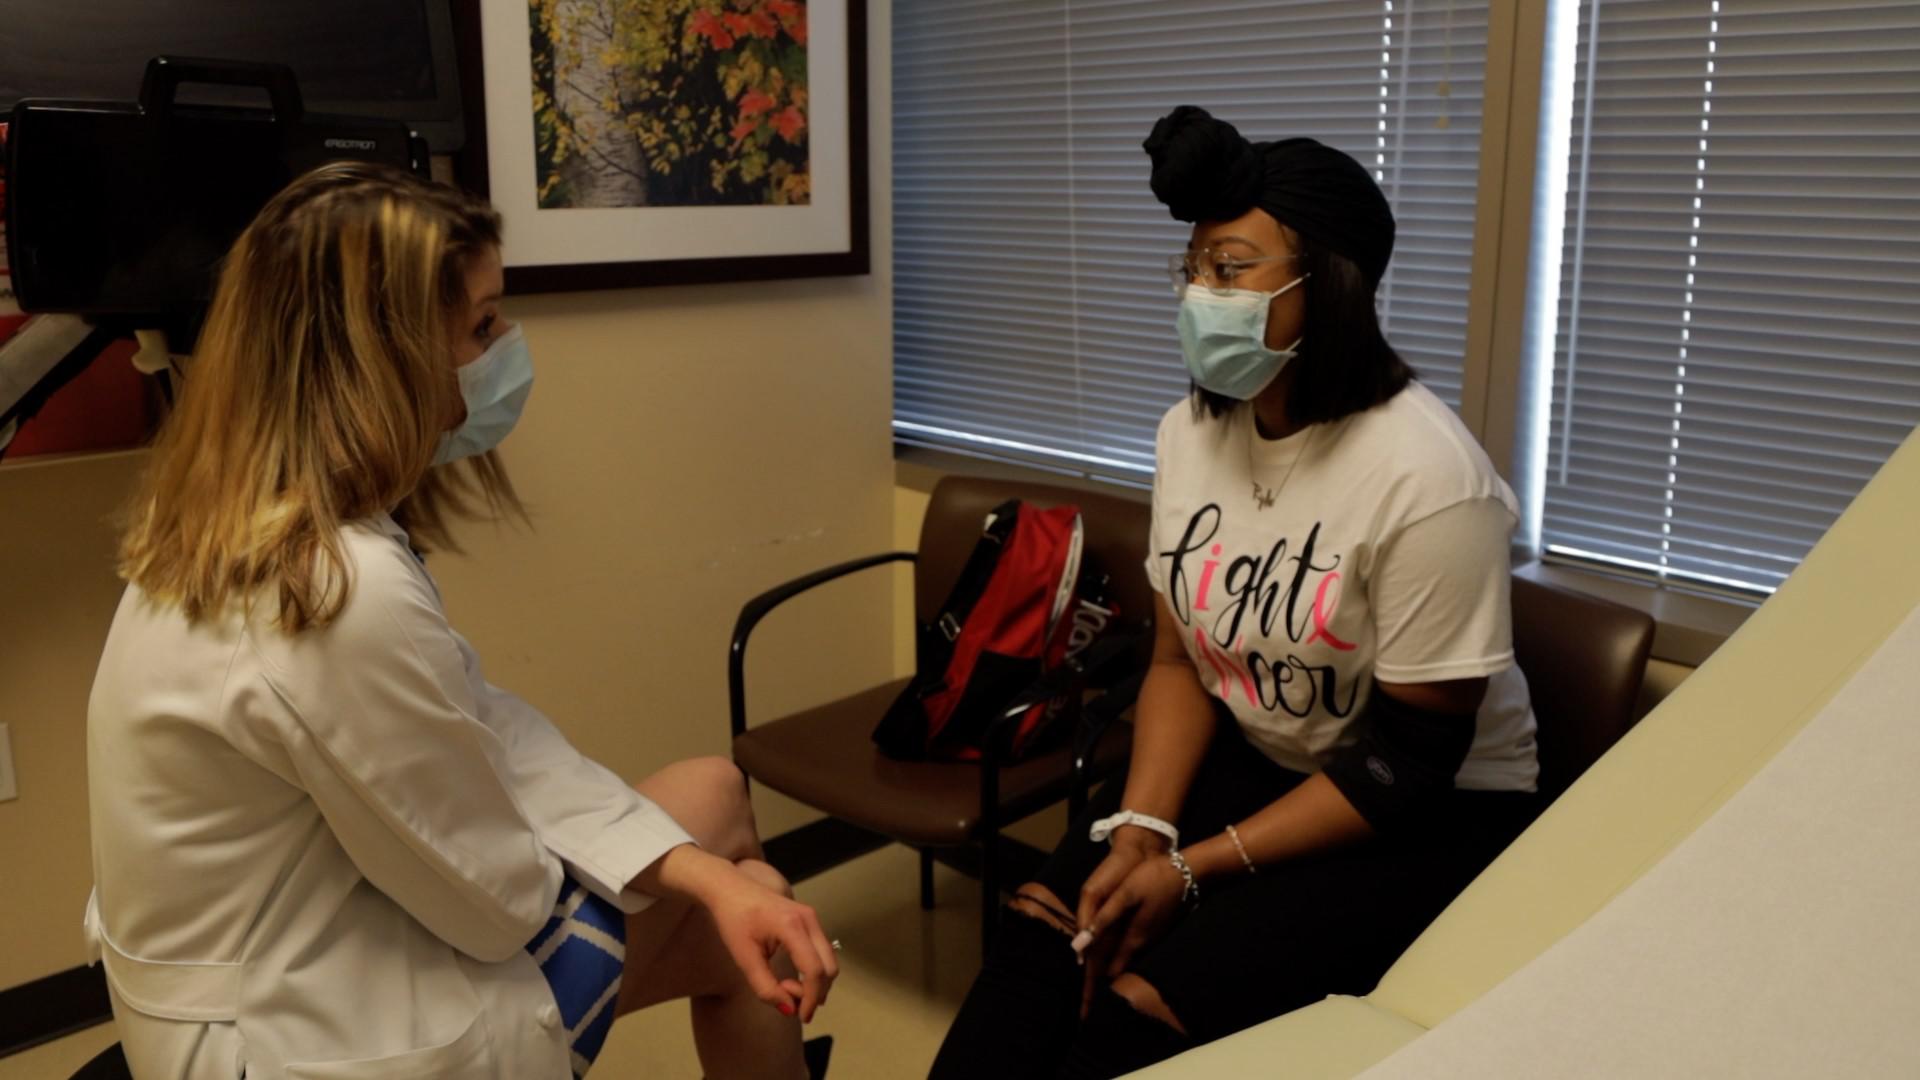 Memorial Hermann Rolls Out Breast Cancer Prevention Program As